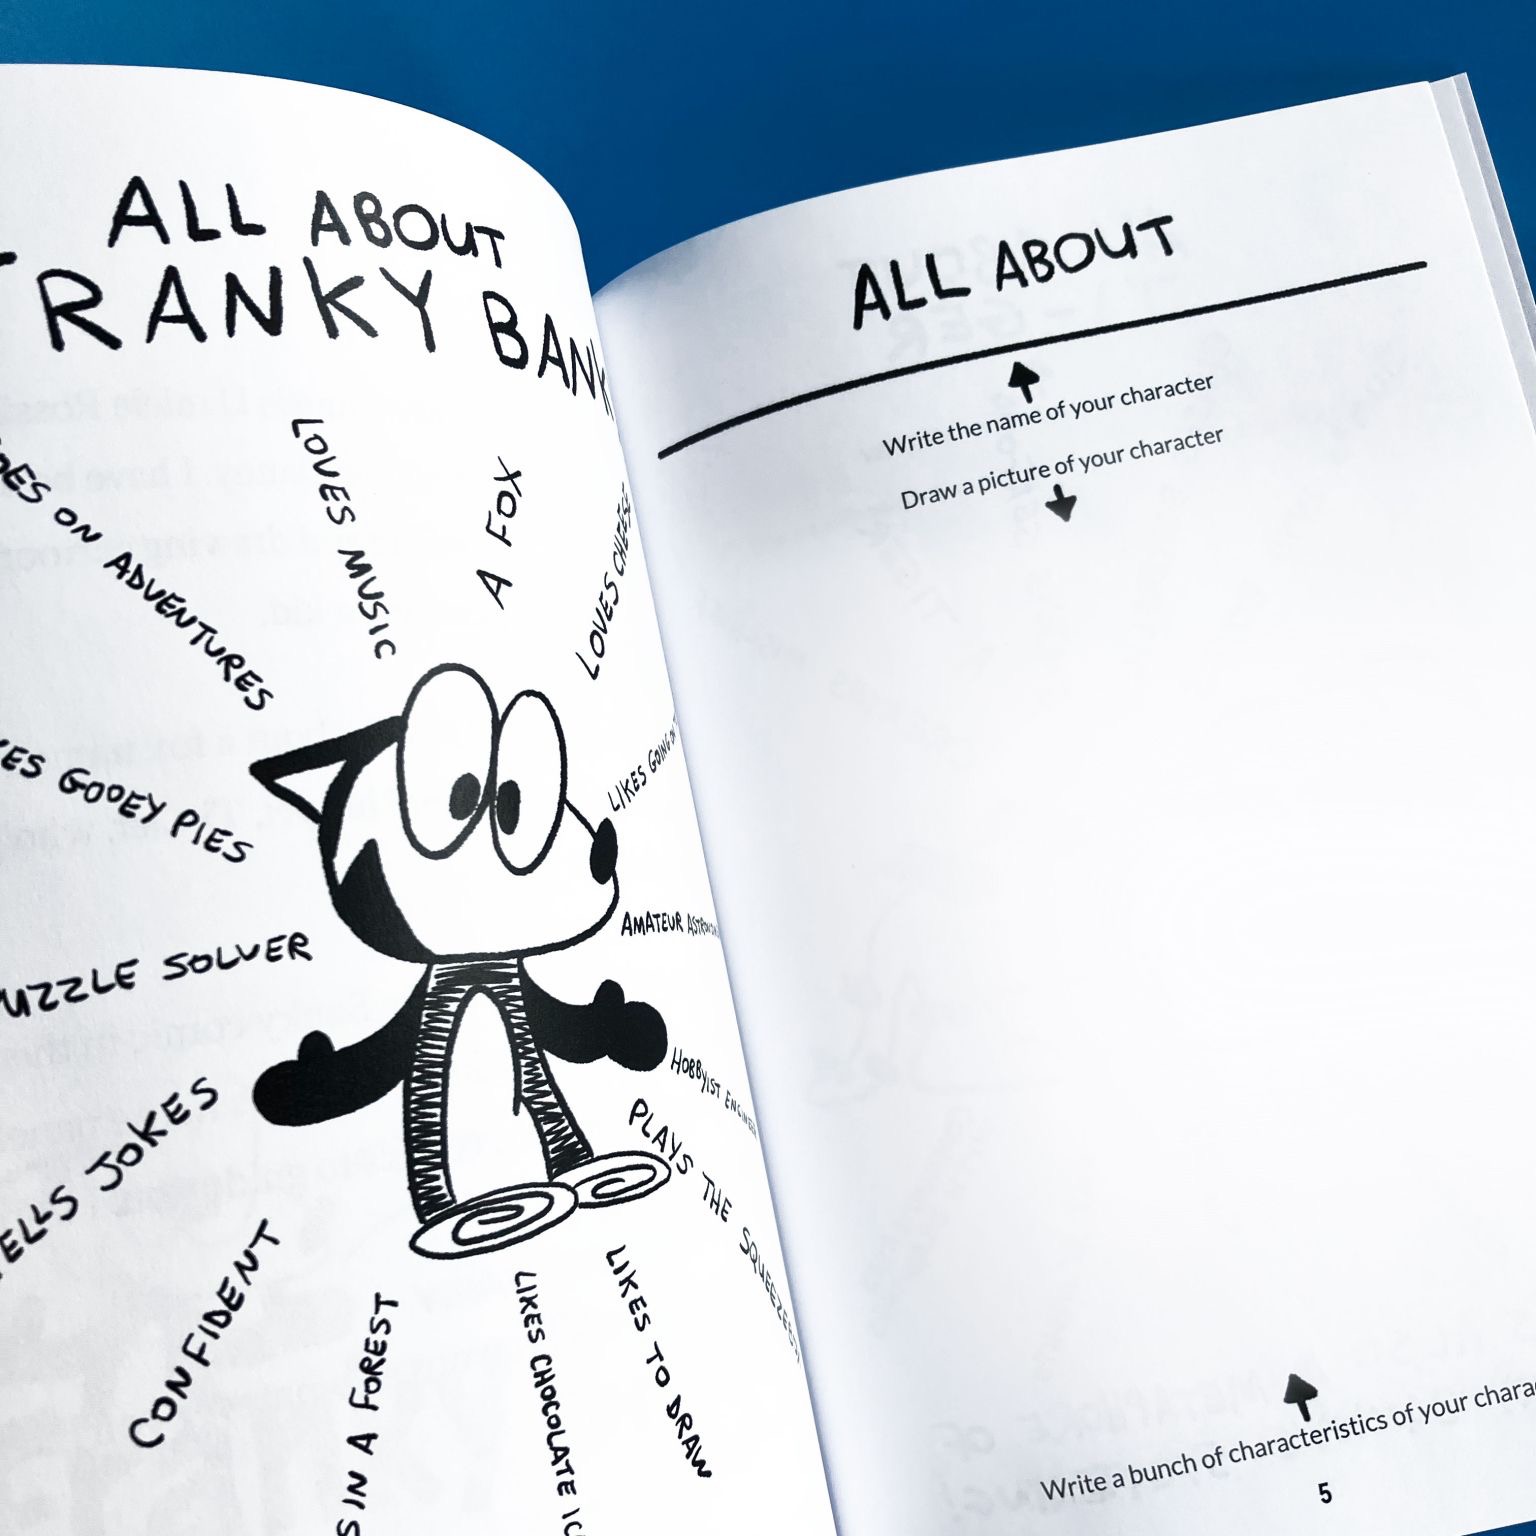 A page a comic book listing the characteristics of the cartoon fox protagonist. The opposite page provides blank space for the reader to draw their own cartoon character along with a list of characteristics.